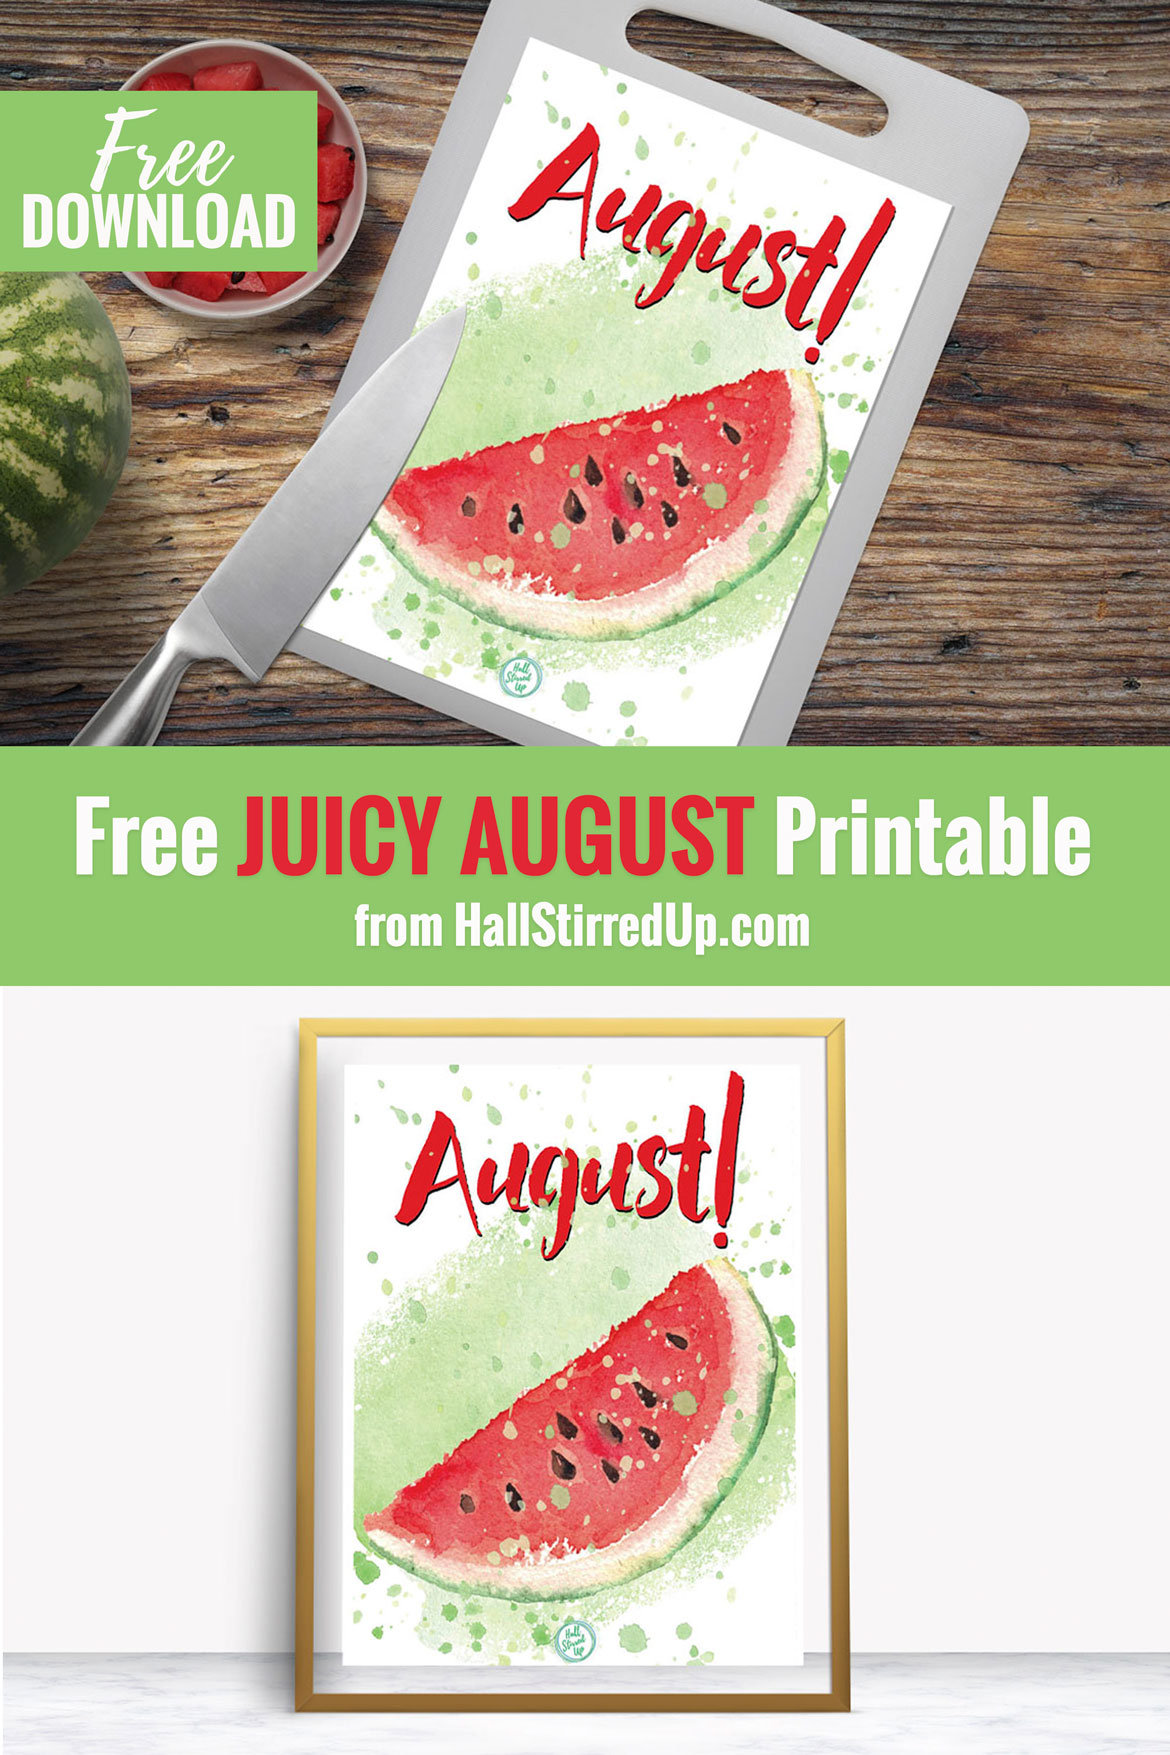 Download your free juicy August printable!